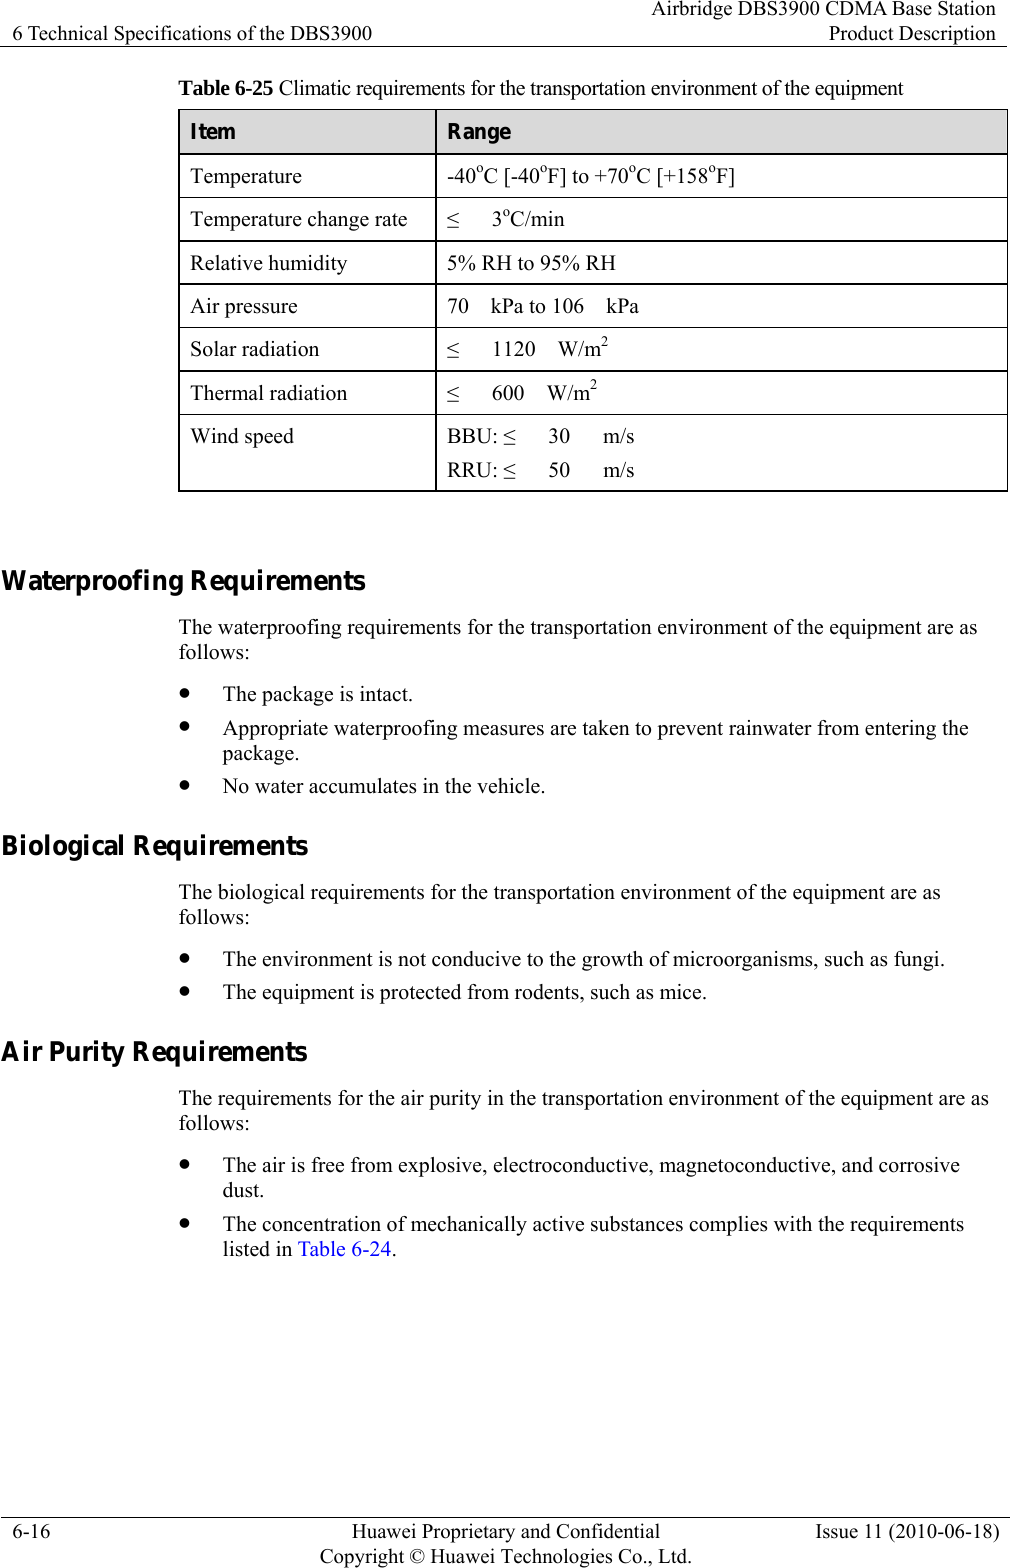 6 Technical Specifications of the DBS3900 Airbridge DBS3900 CDMA Base StationProduct Description 6-16  Huawei Proprietary and Confidential     Copyright © Huawei Technologies Co., Ltd.Issue 11 (2010-06-18) Table 6-25 Climatic requirements for the transportation environment of the equipment Item  Range Temperature -40oC [-40oF] to +70oC [+158oF] Temperature change rate  ≤   3oC/min Relative humidity  5% RH to 95% RH Air pressure  70    kPa to 106    kPa Solar radiation  ≤   1120  W/m2 Thermal radiation  ≤   600  W/m2 Wind speed  BBU: ≤   30   m/s RRU: ≤   50   m/s  Waterproofing Requirements The waterproofing requirements for the transportation environment of the equipment are as follows: z The package is intact. z Appropriate waterproofing measures are taken to prevent rainwater from entering the package. z No water accumulates in the vehicle. Biological Requirements The biological requirements for the transportation environment of the equipment are as follows: z The environment is not conducive to the growth of microorganisms, such as fungi. z The equipment is protected from rodents, such as mice. Air Purity Requirements The requirements for the air purity in the transportation environment of the equipment are as follows: z The air is free from explosive, electroconductive, magnetoconductive, and corrosive dust. z The concentration of mechanically active substances complies with the requirements listed in Table 6-24. 